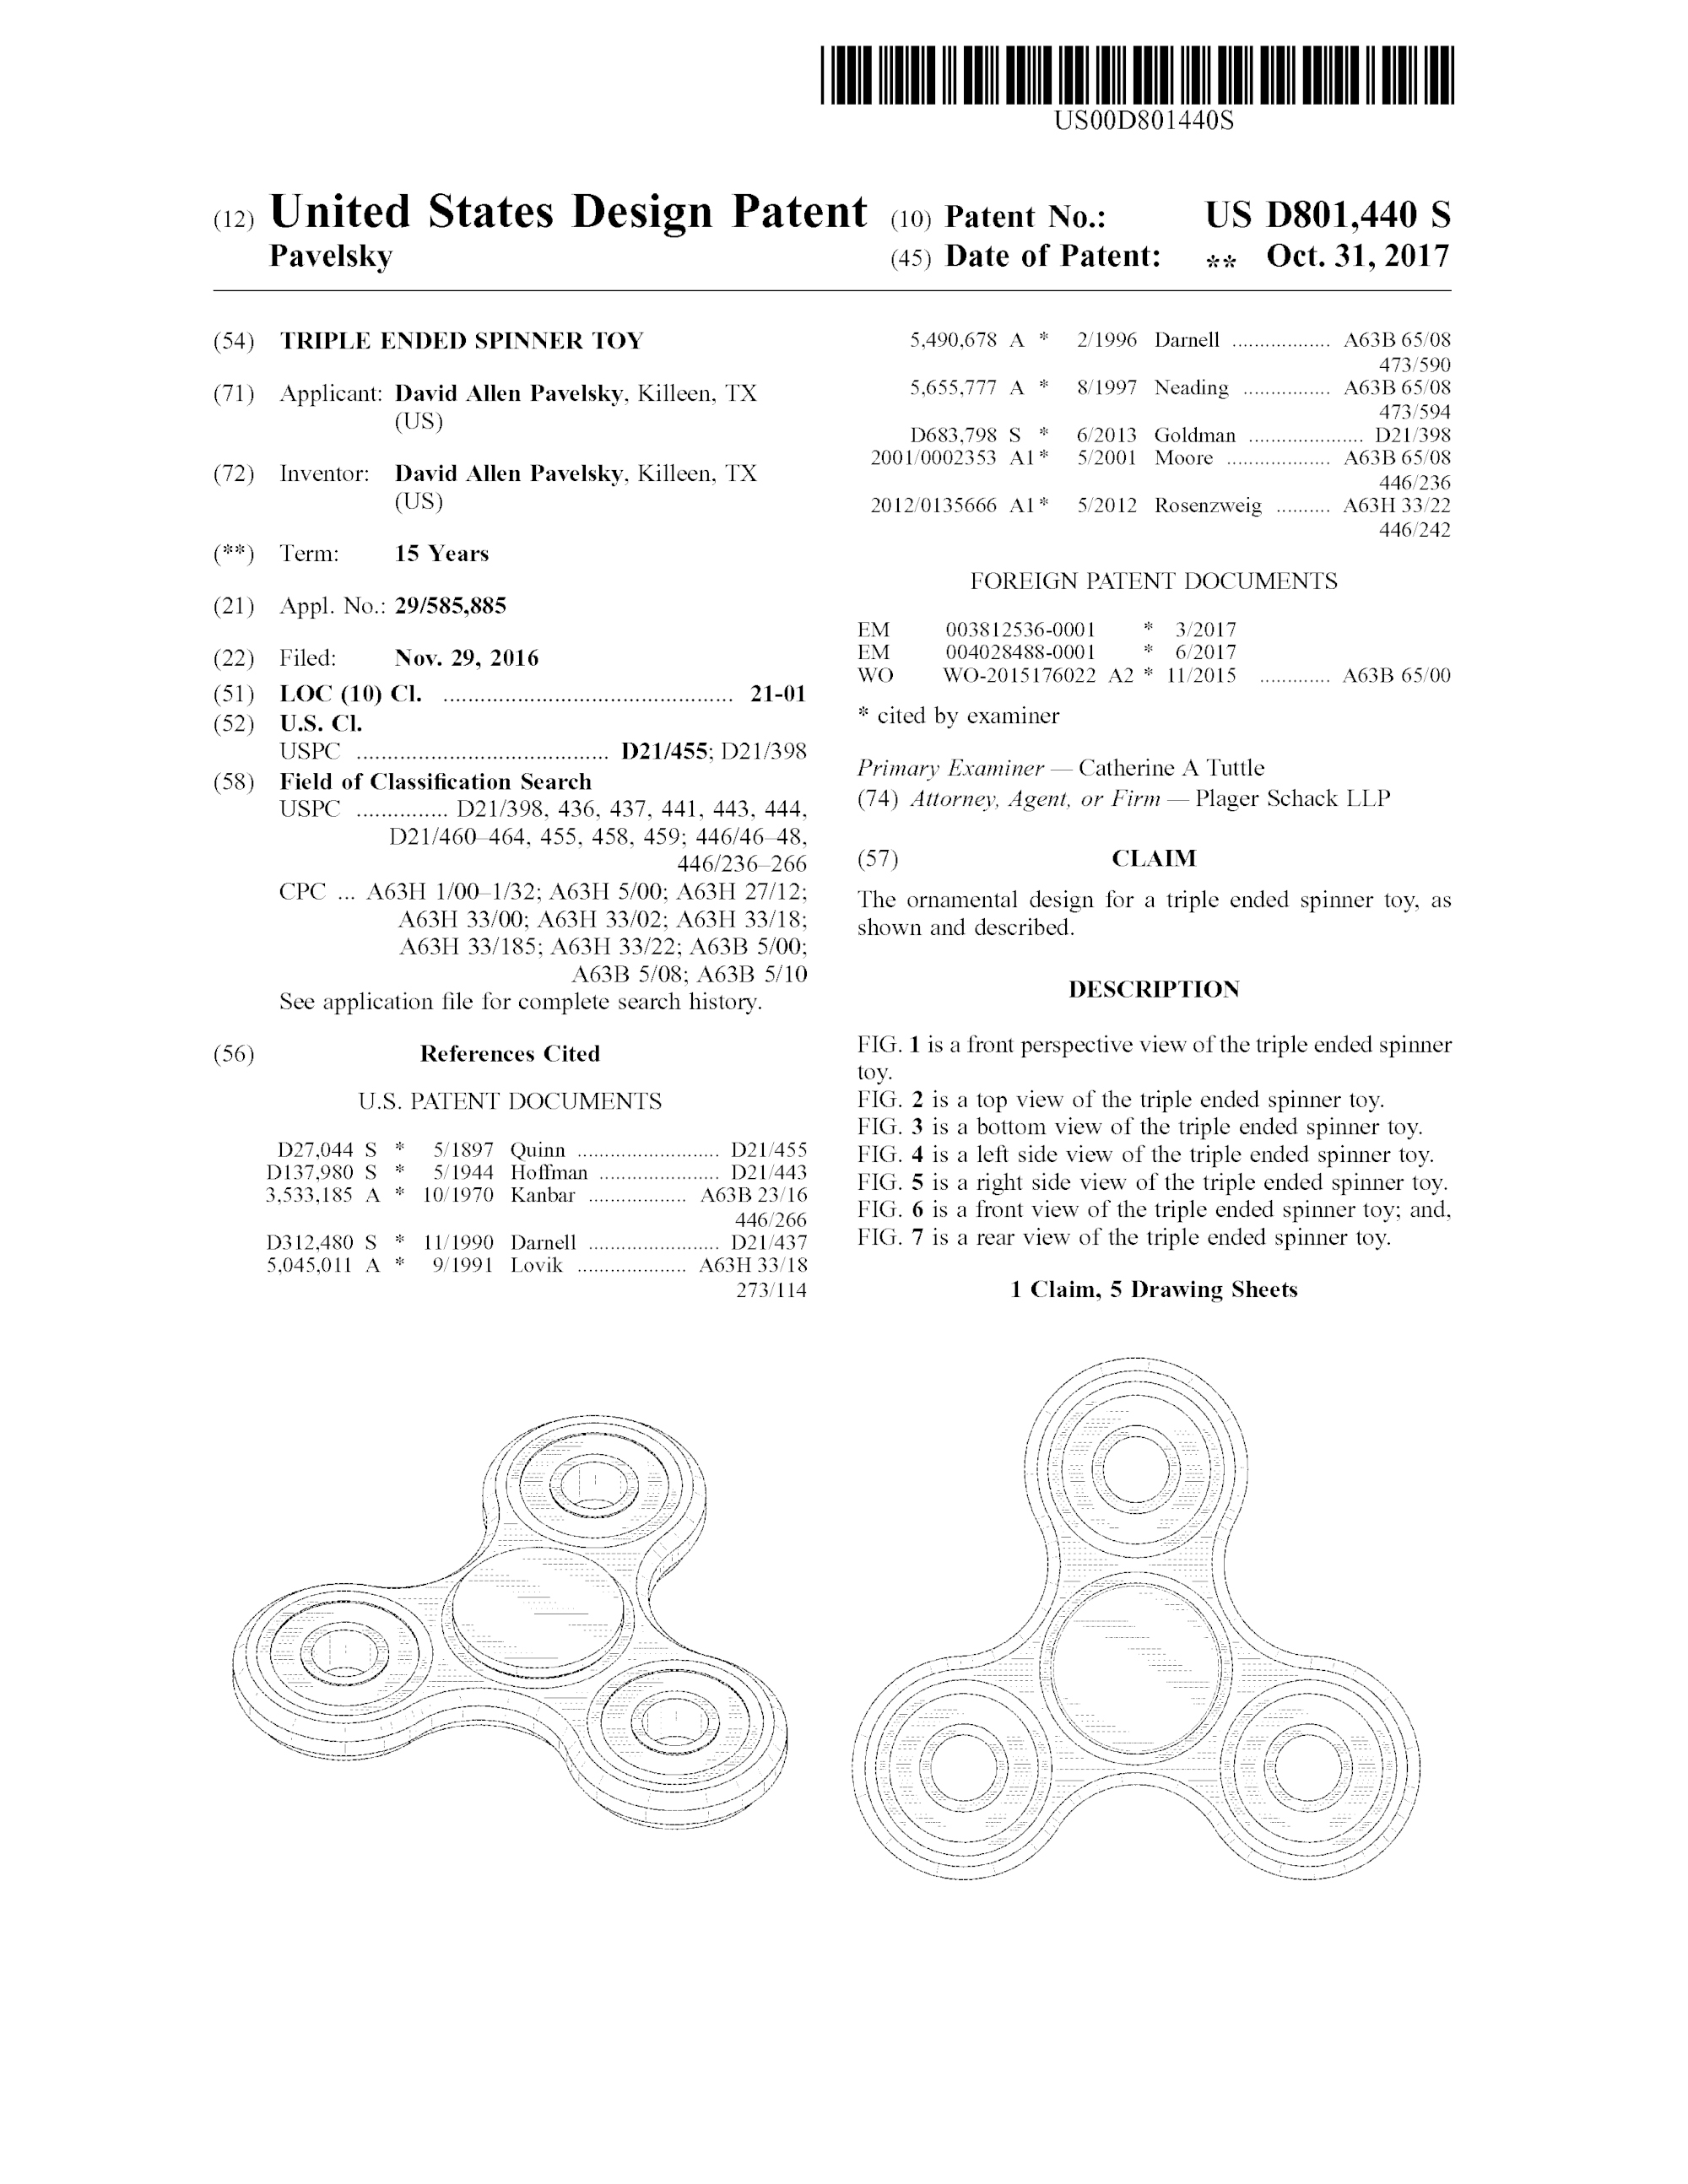 Triple Ended Spinner Toy, David Allen Pavelsky, 2016/2017. Patent Number: USD 801,440, U.S. Patent Office